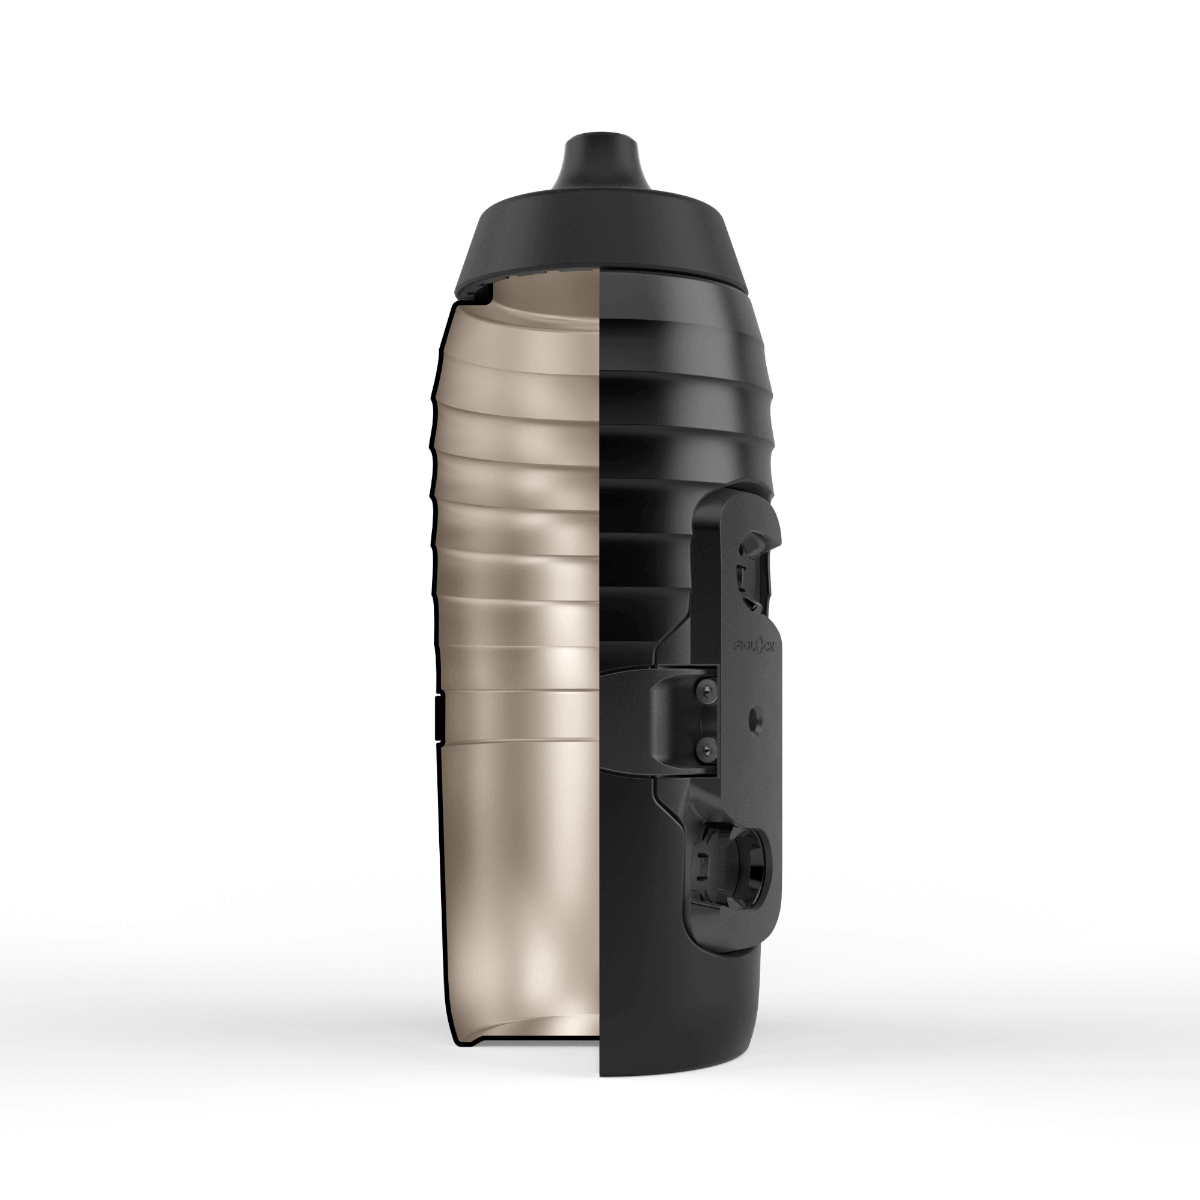 Cut of black bicycle bottle TWIST x KEEGO 0.6L with visible titanium interior